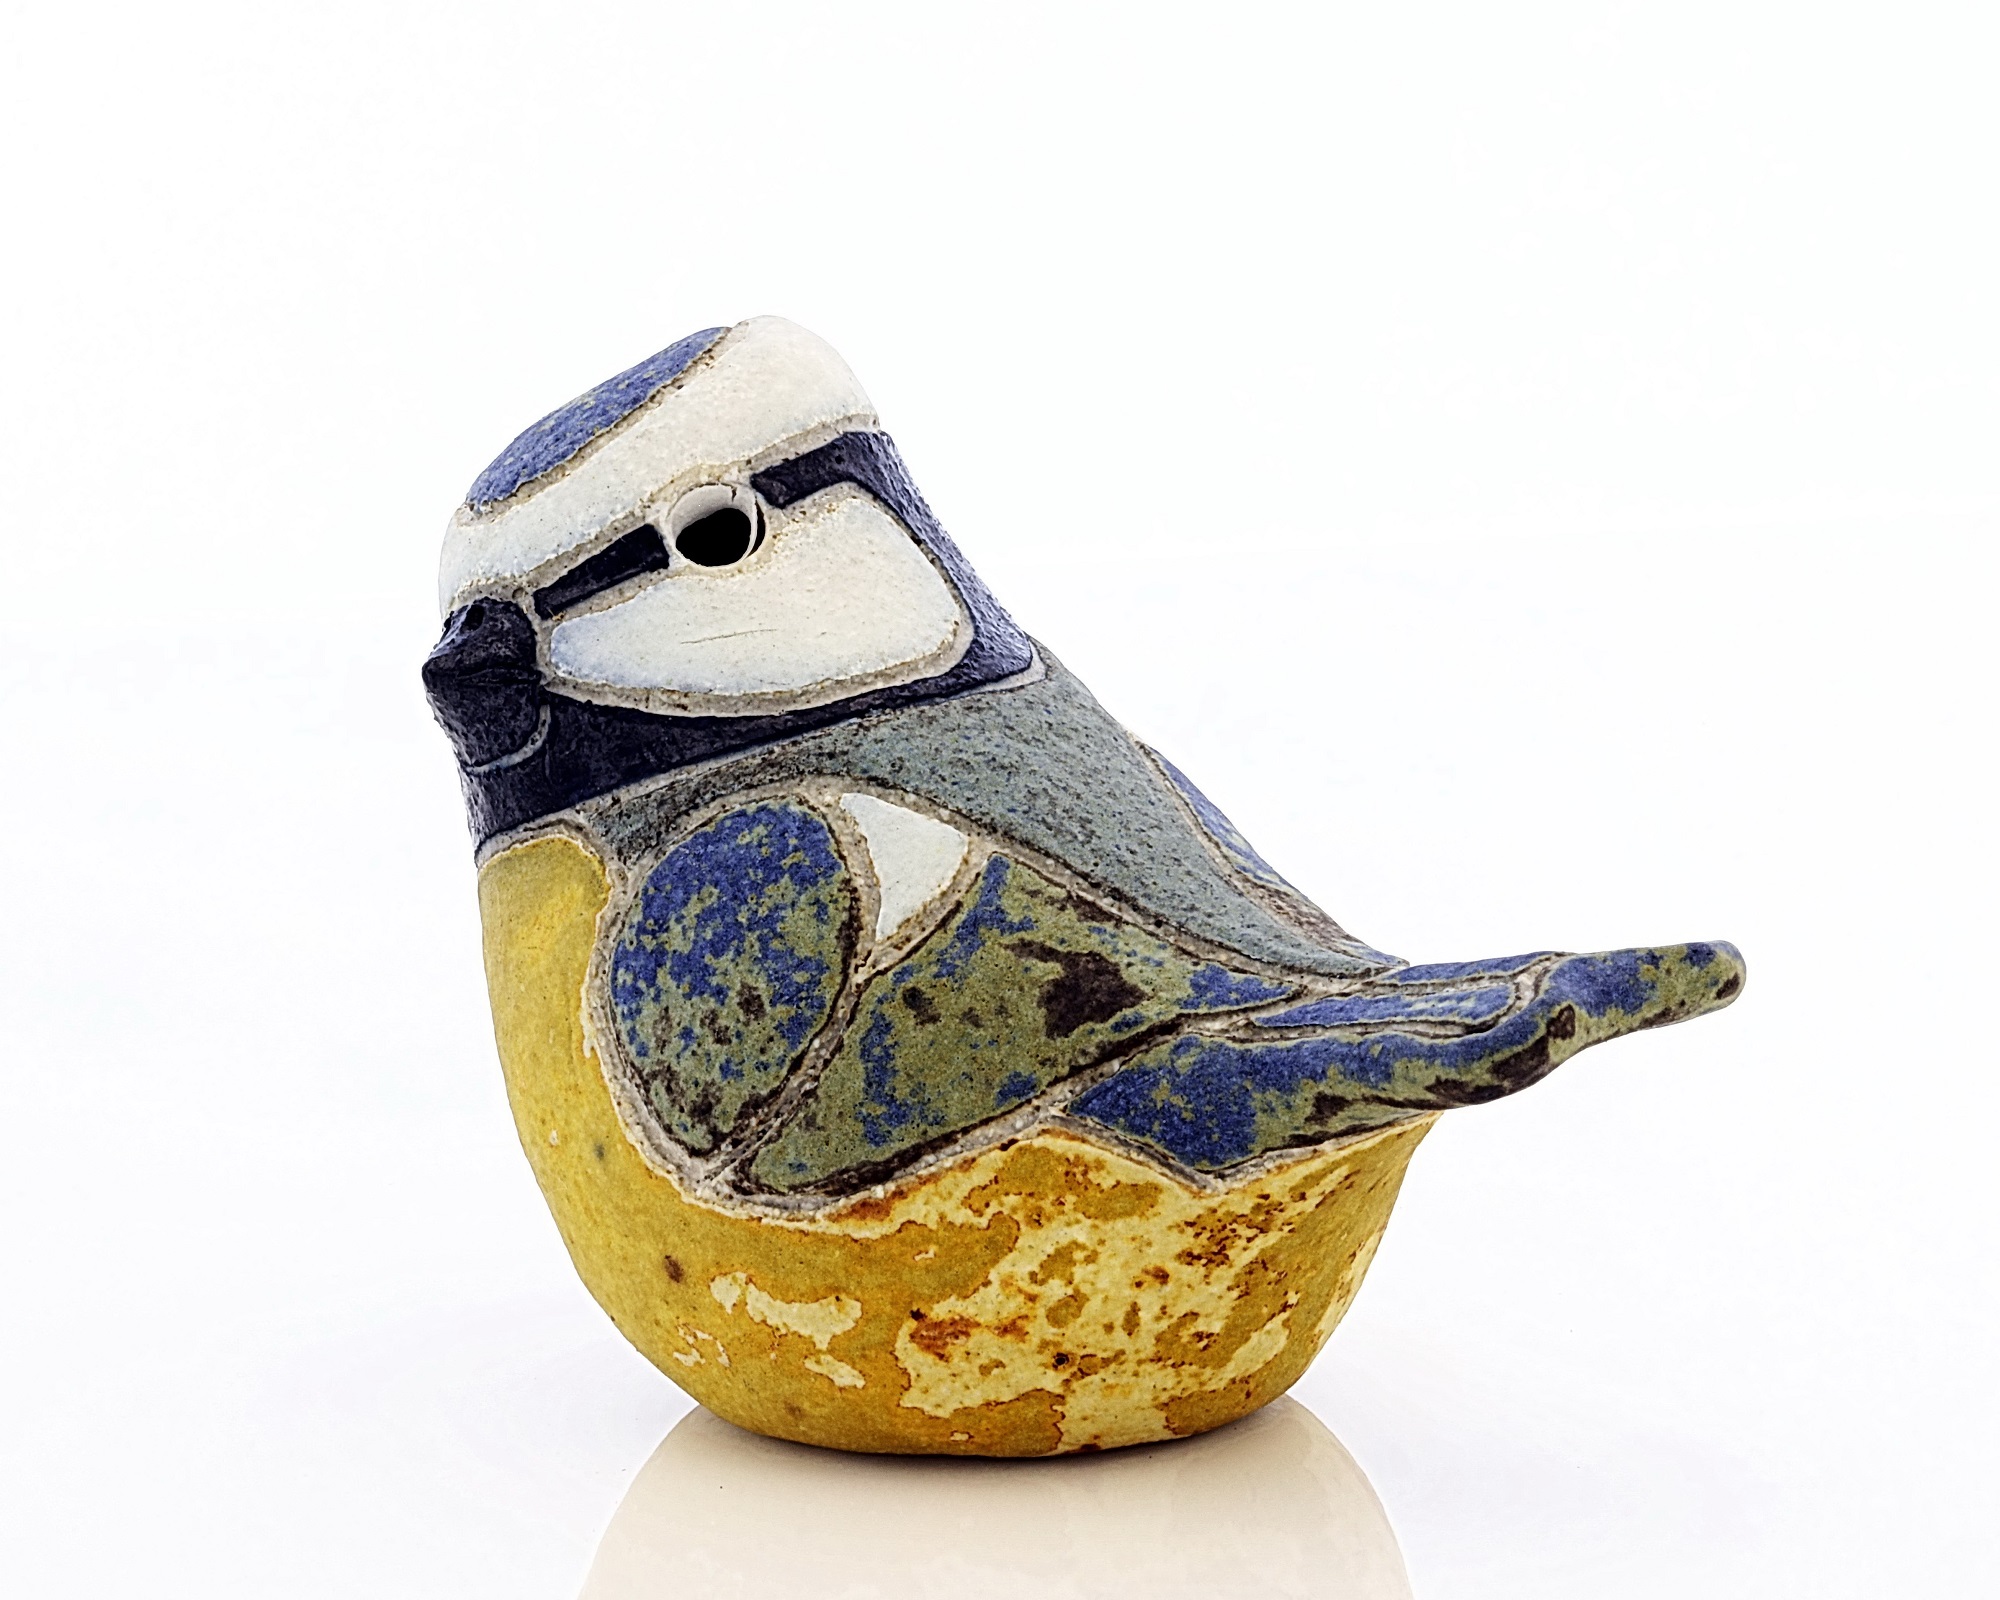 Pottery blue tit, approximately life-size, with a matt glaze, coloured blue and yellow. It is one of three pottery birds made in 1987 by Rosemary Wren and Peter Crotty from drawings from life.